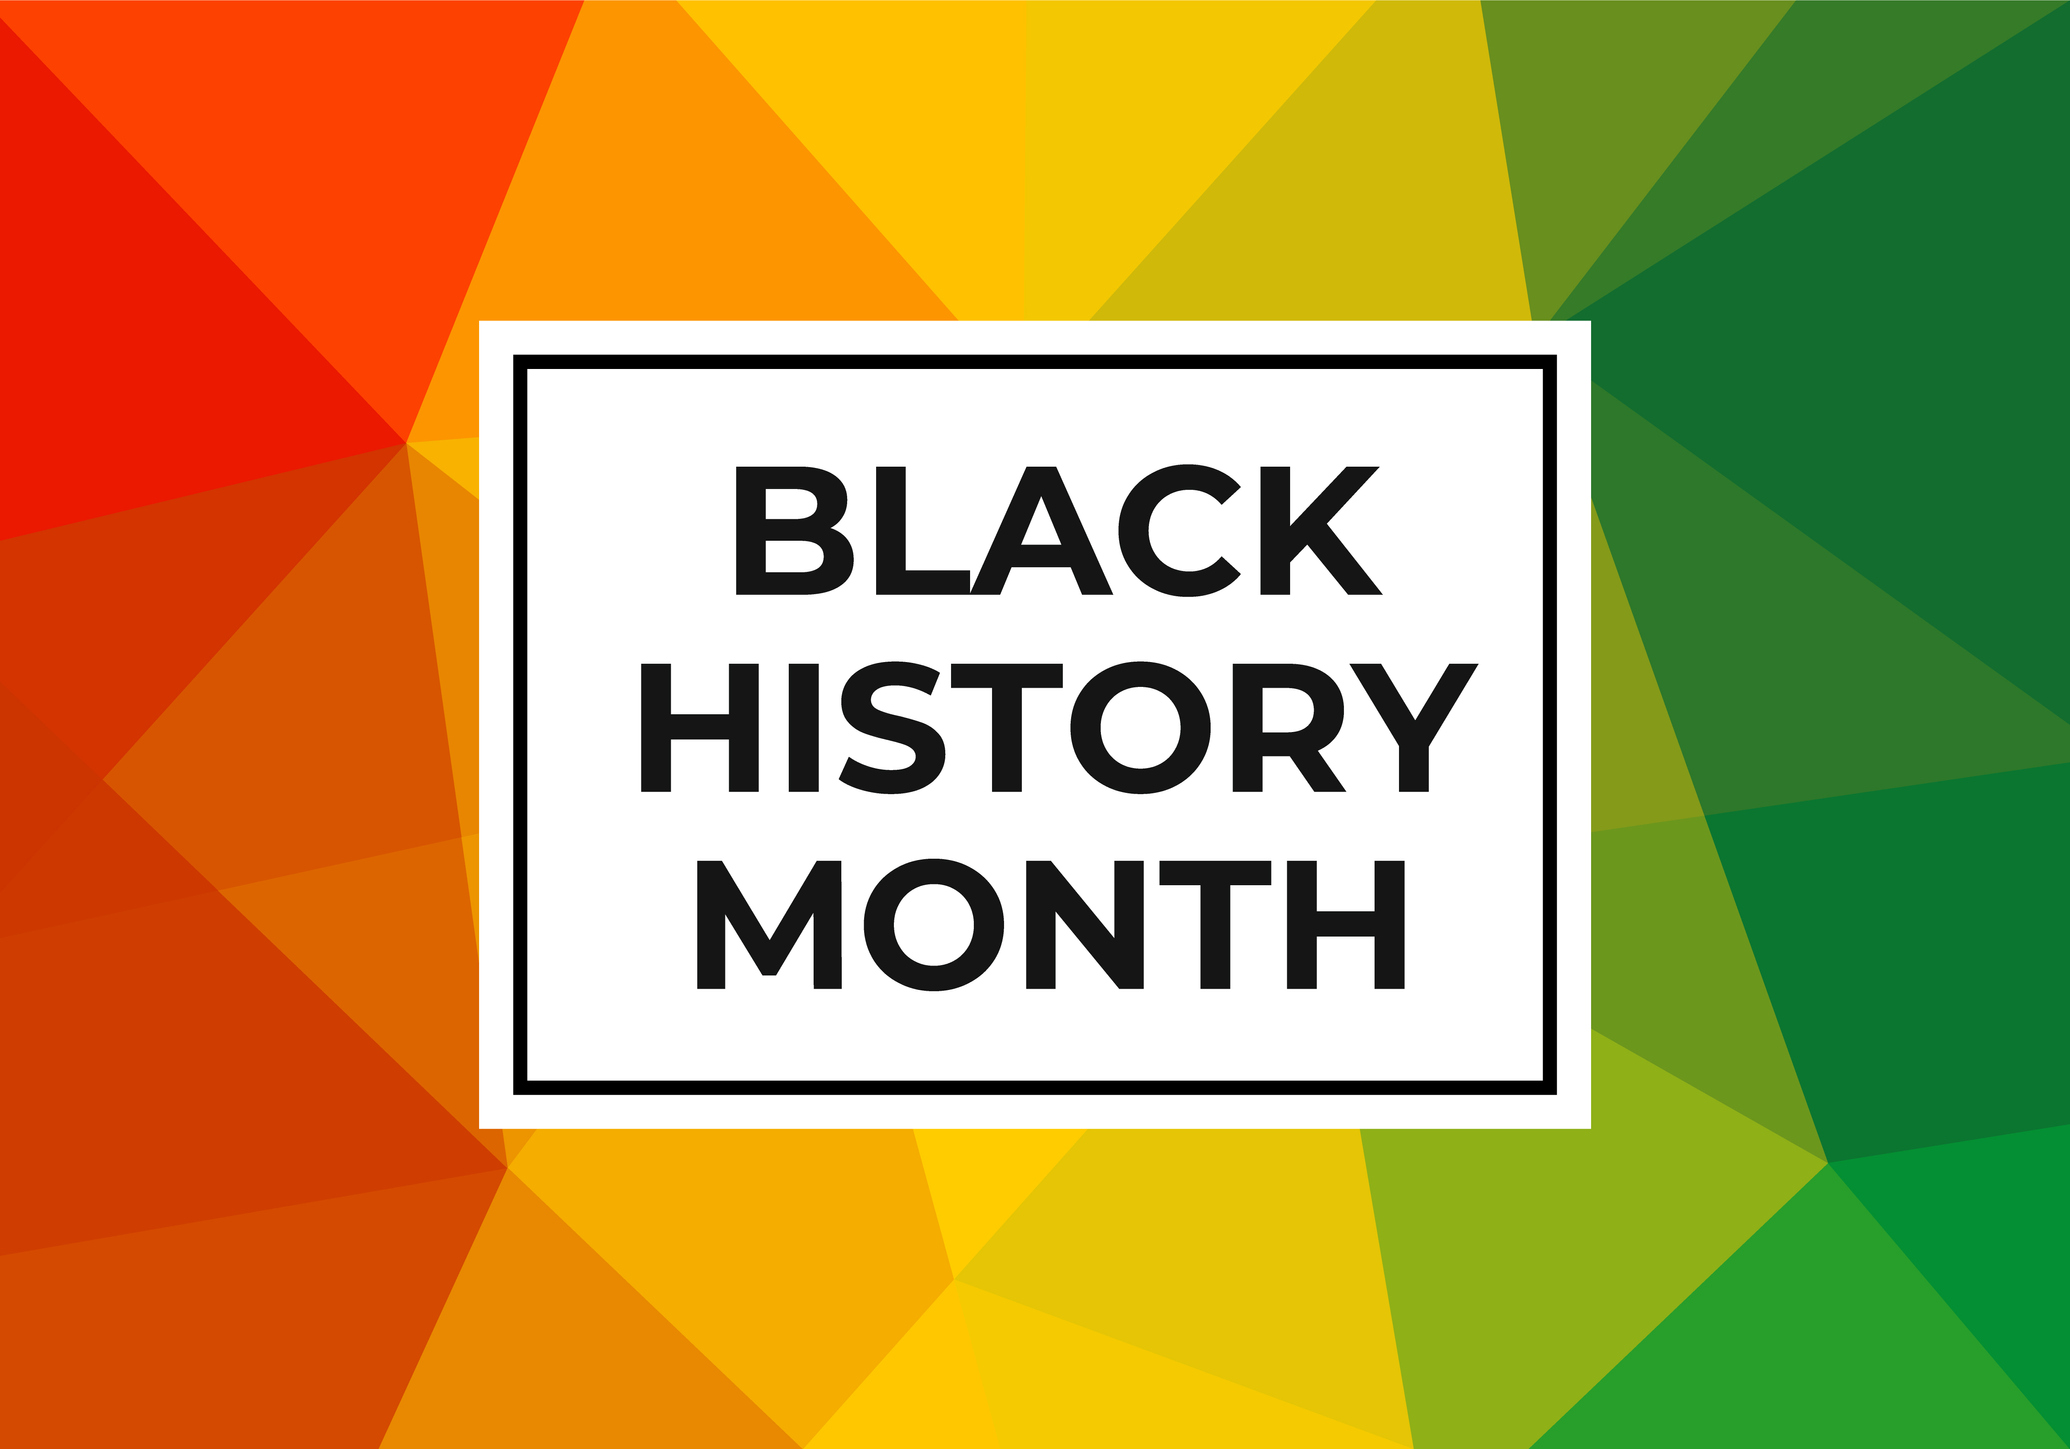 Black History Month events taking place in London, Ont.